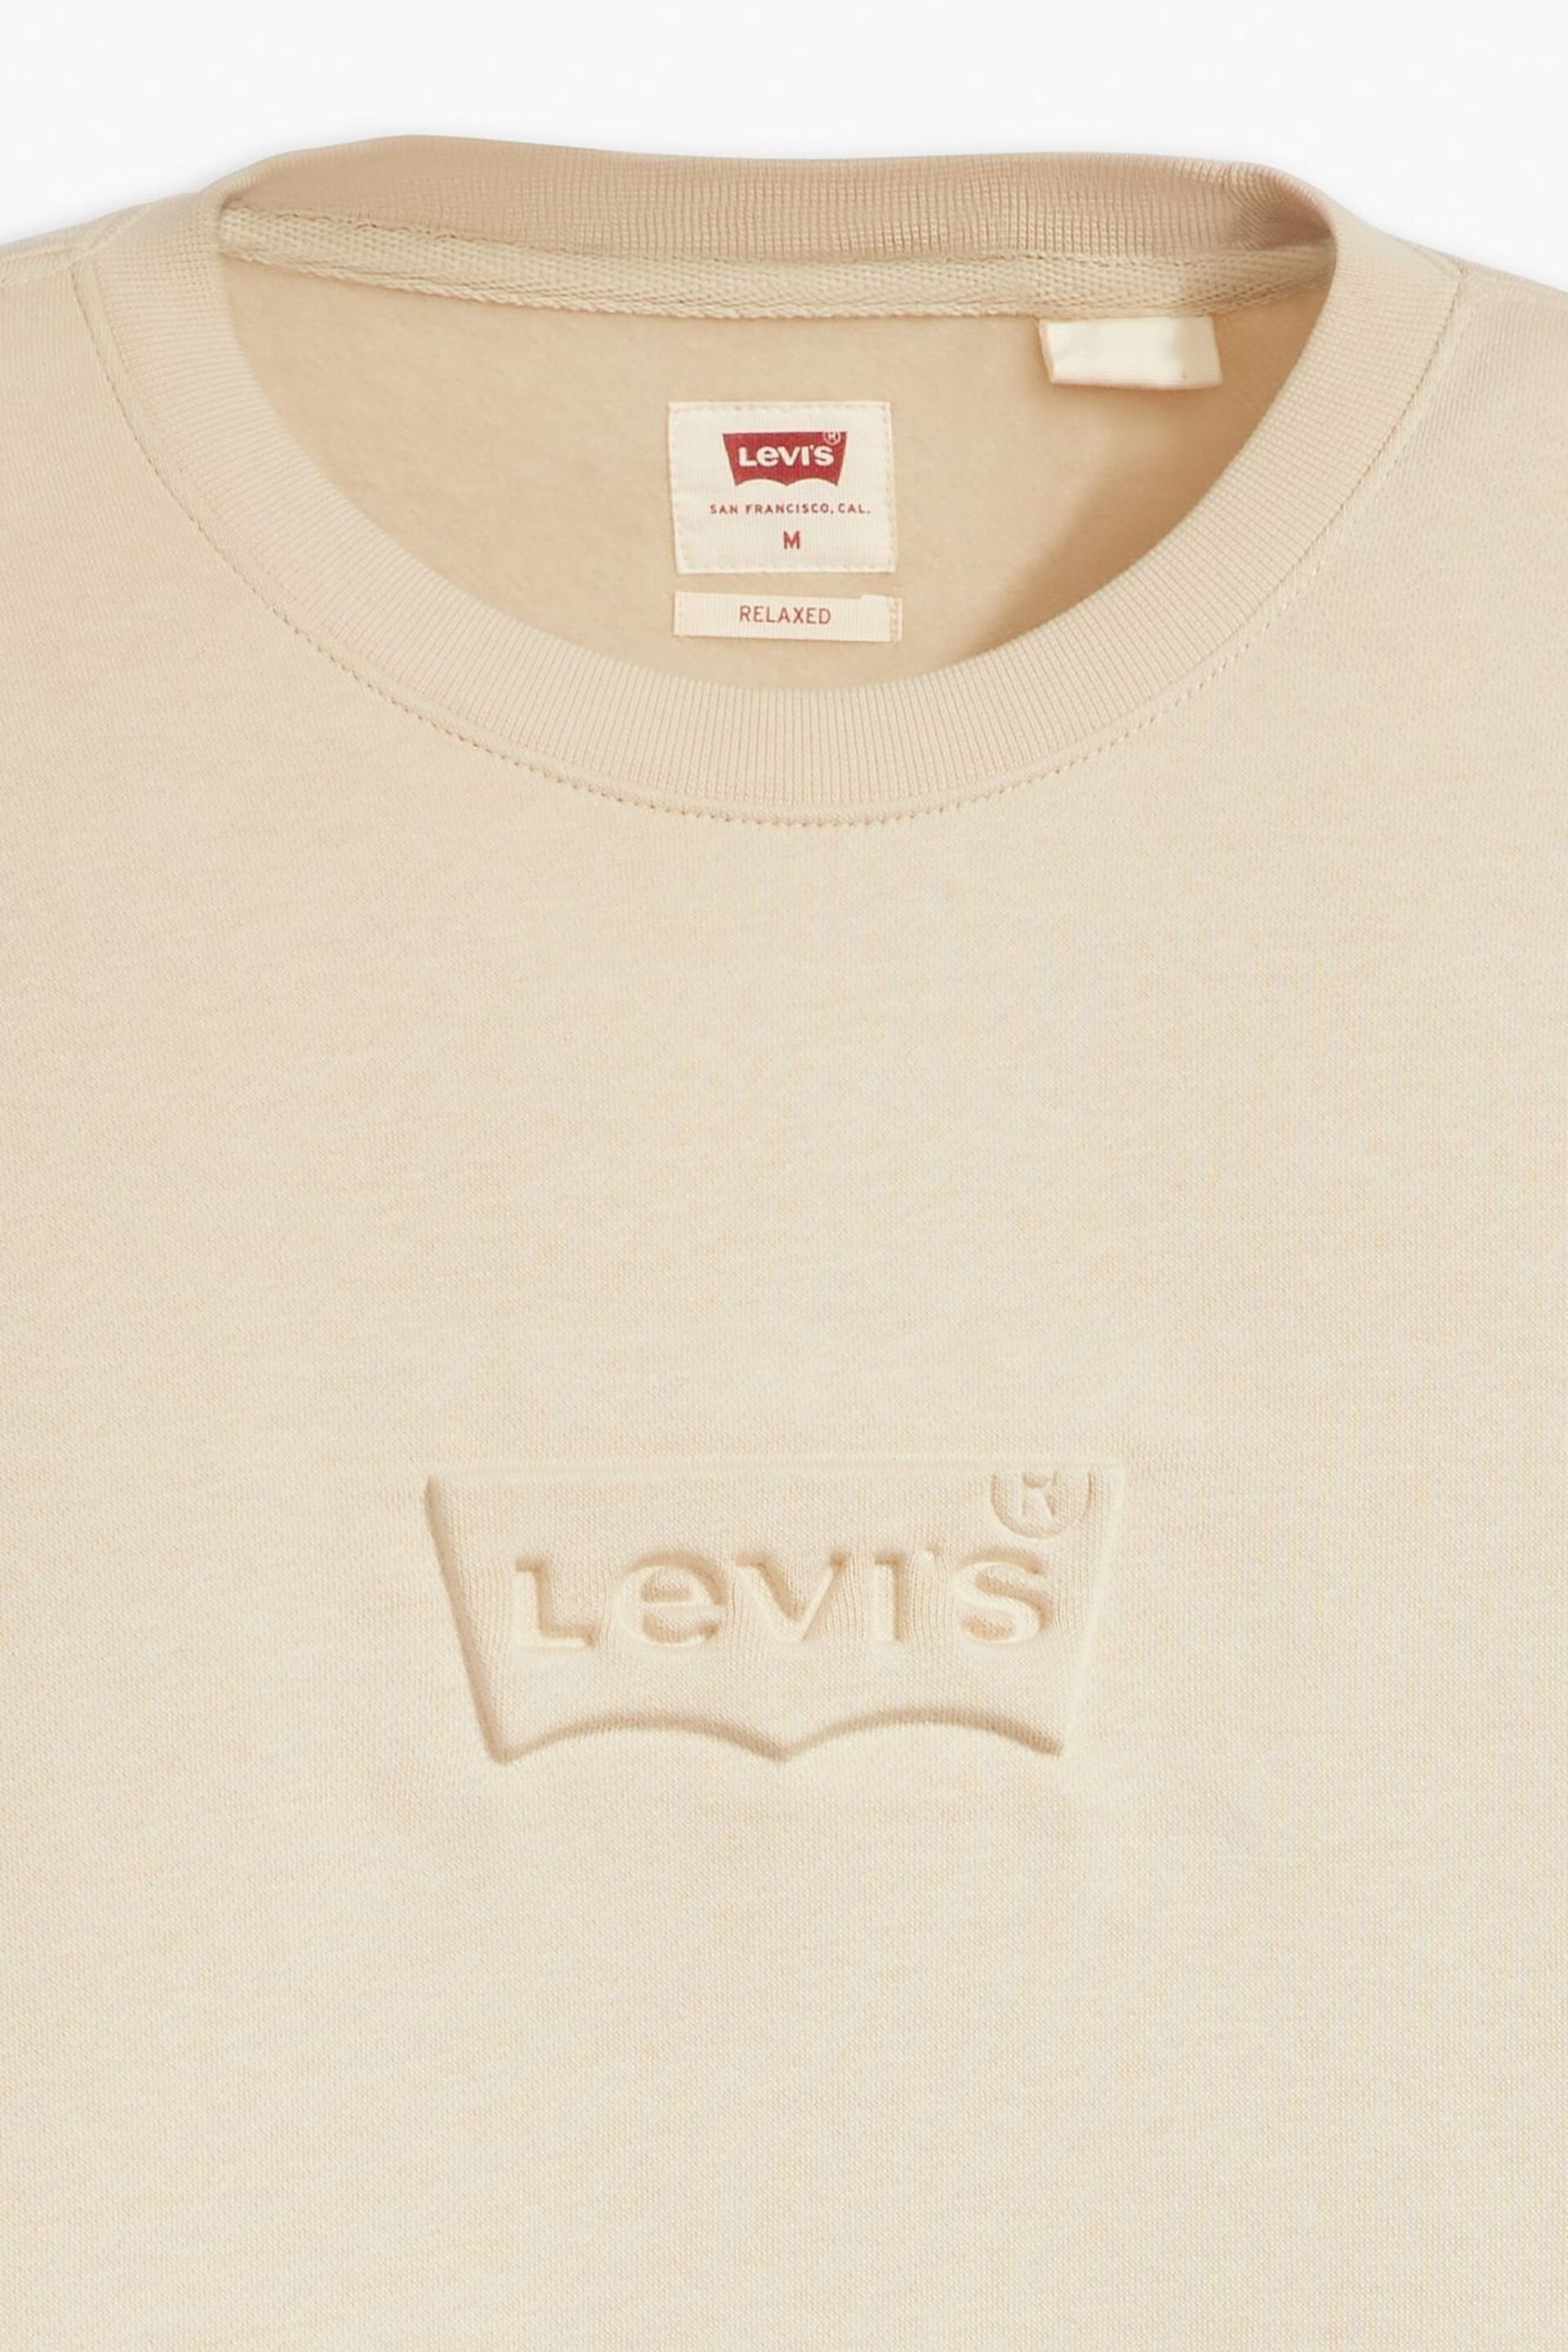 Levi's® Nude Relaxed Fit Graphic Crewneck Sweatshirt - Image 6 of 6